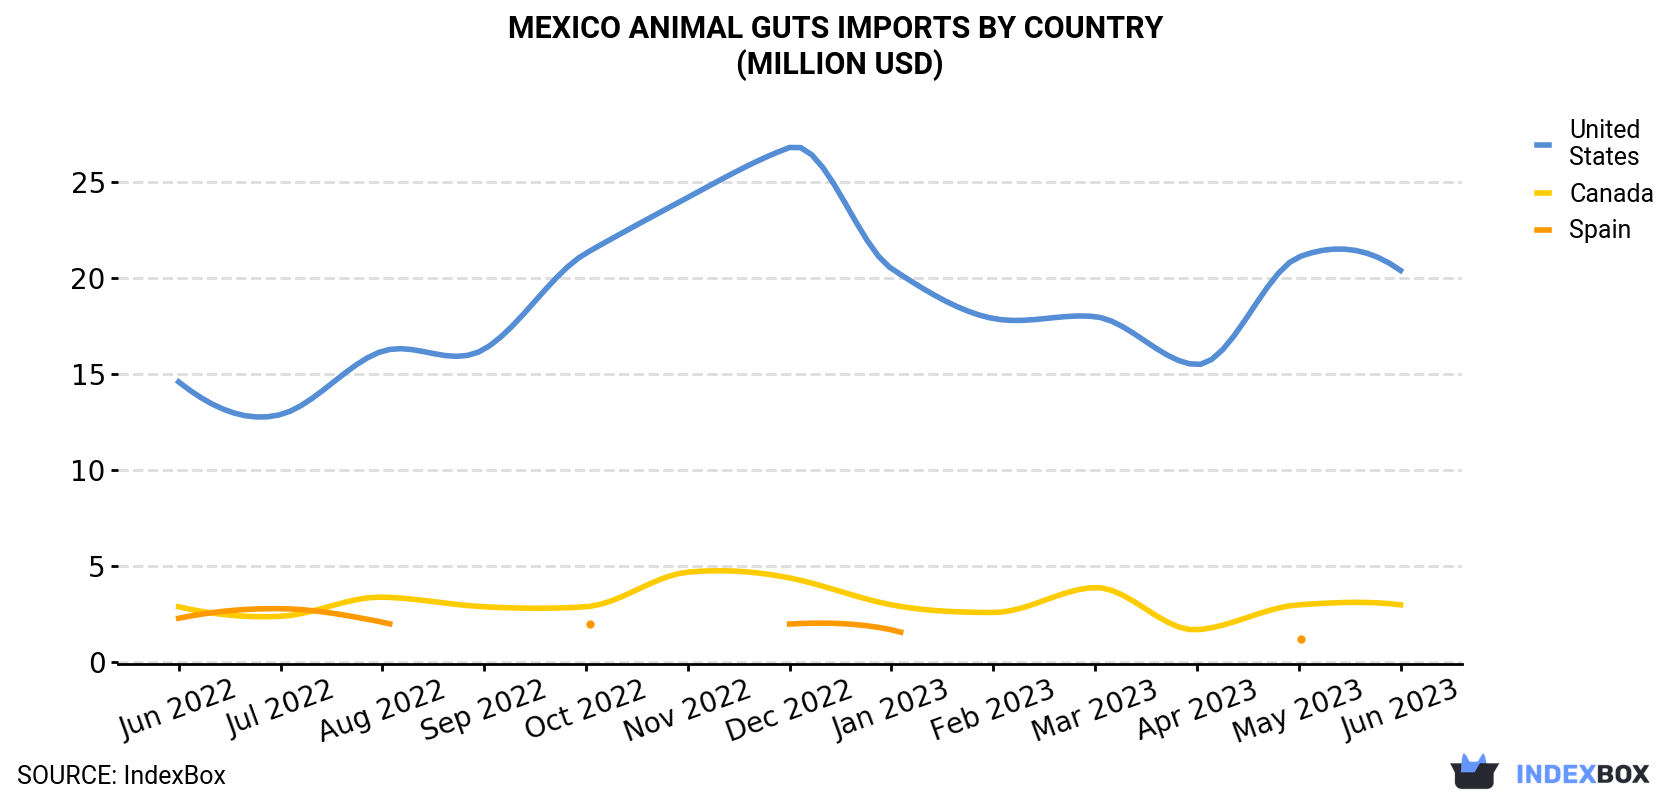 Mexico Animal Guts Imports By Country (Million USD)